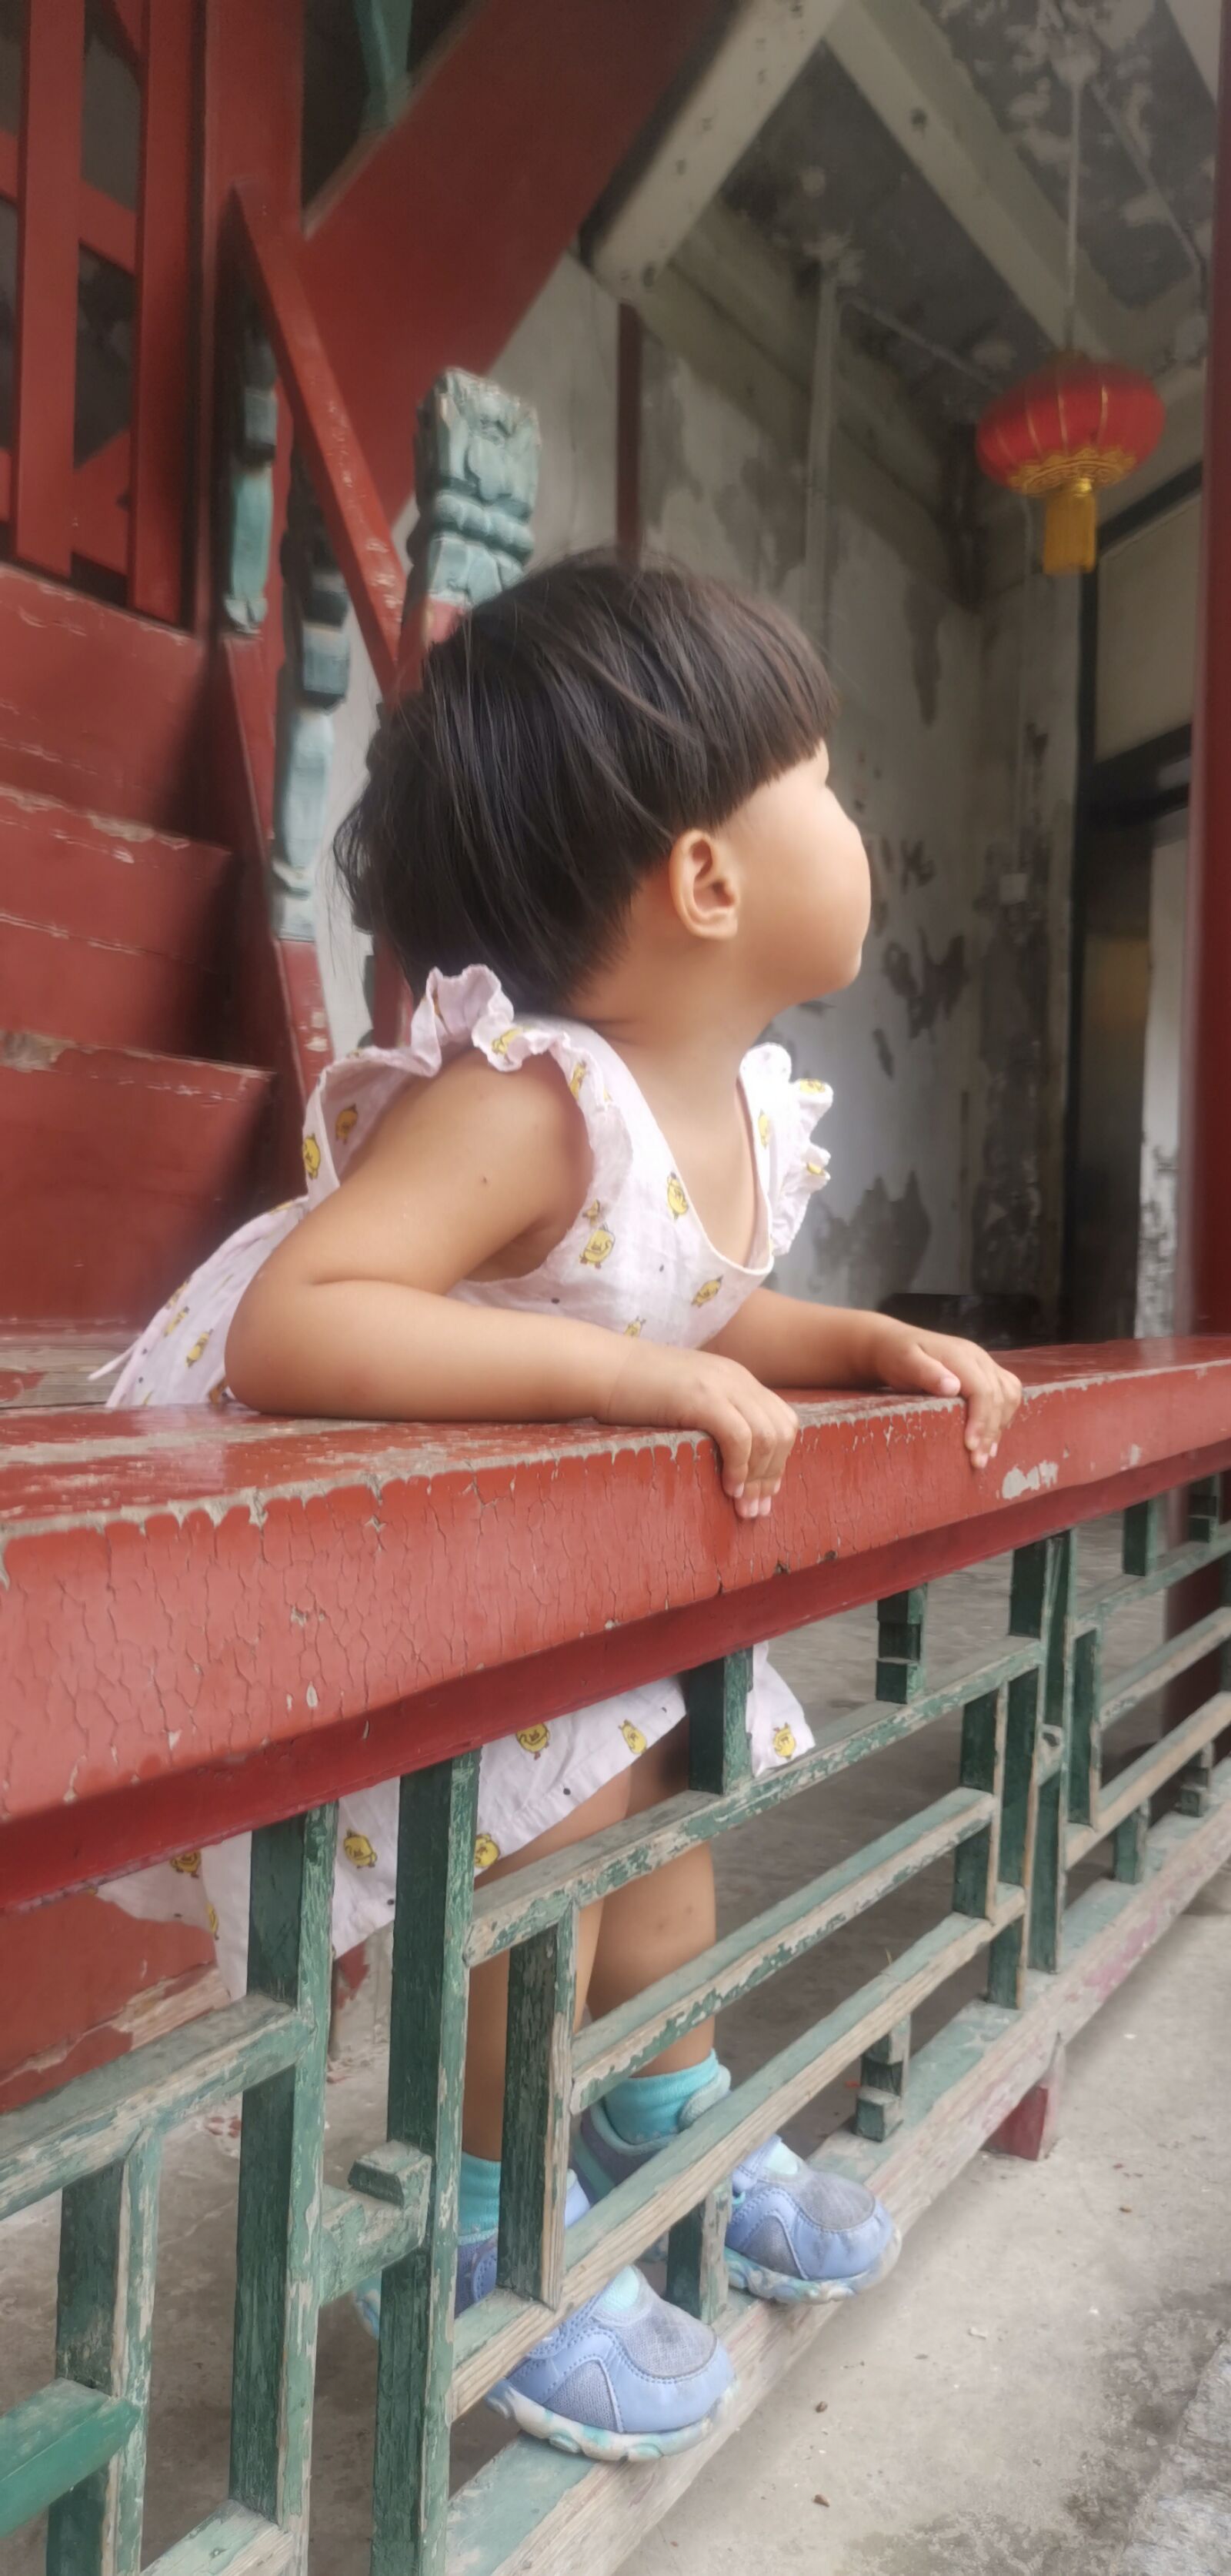 HUAWEI Mate 20 Pro sample photo. Peaceful, child, ancient architecture photography